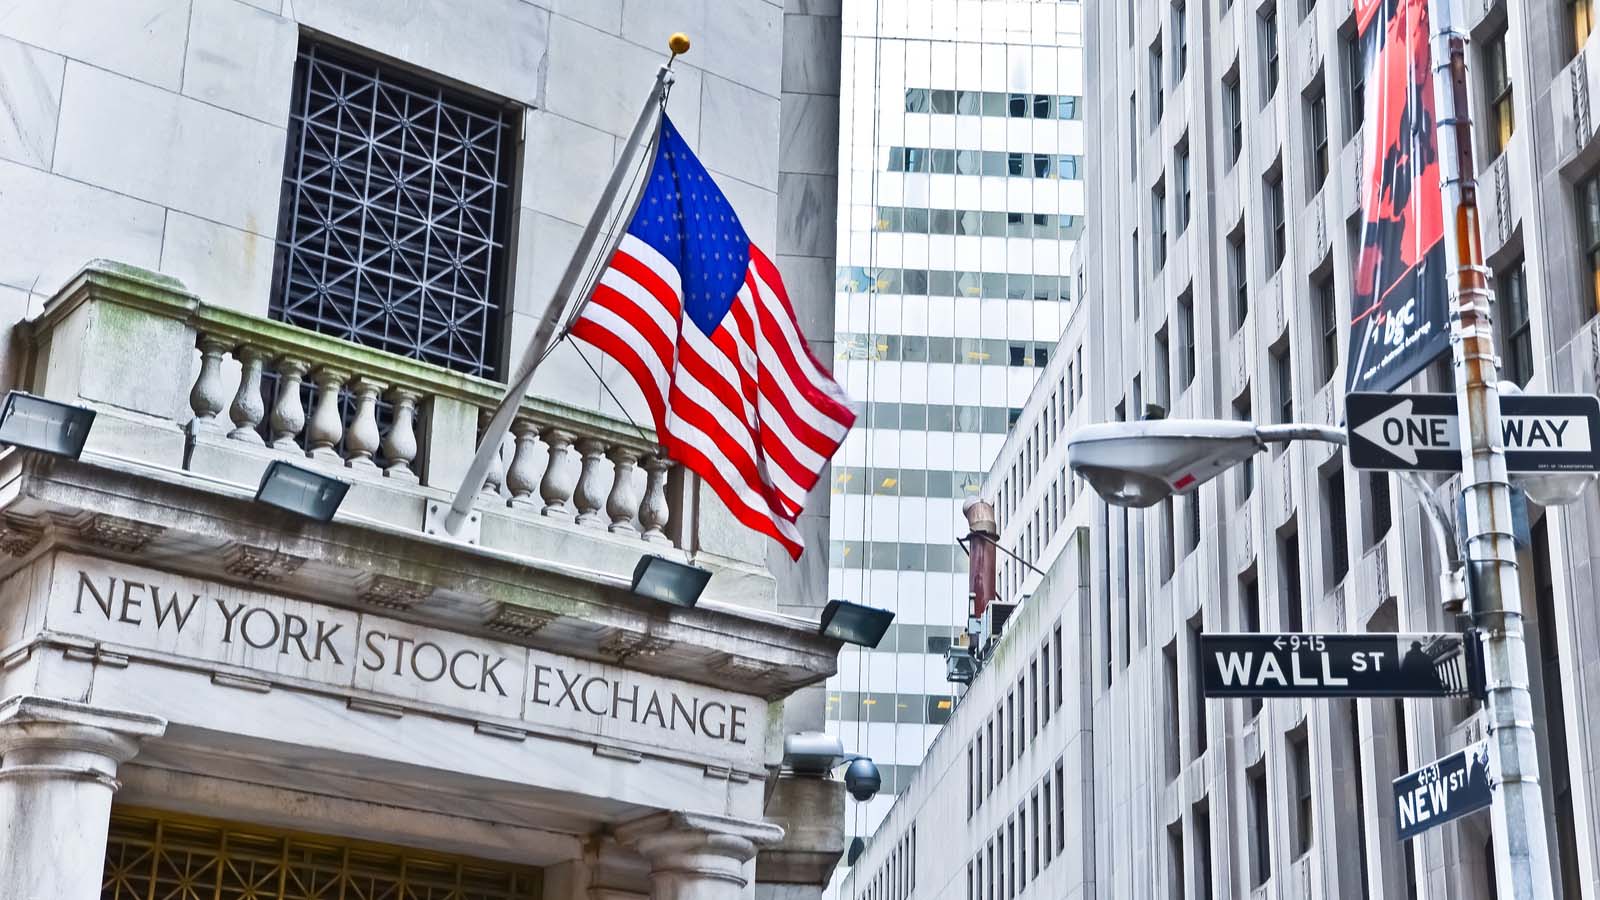 Is the Stock Exchange closed for June 16, 2022?